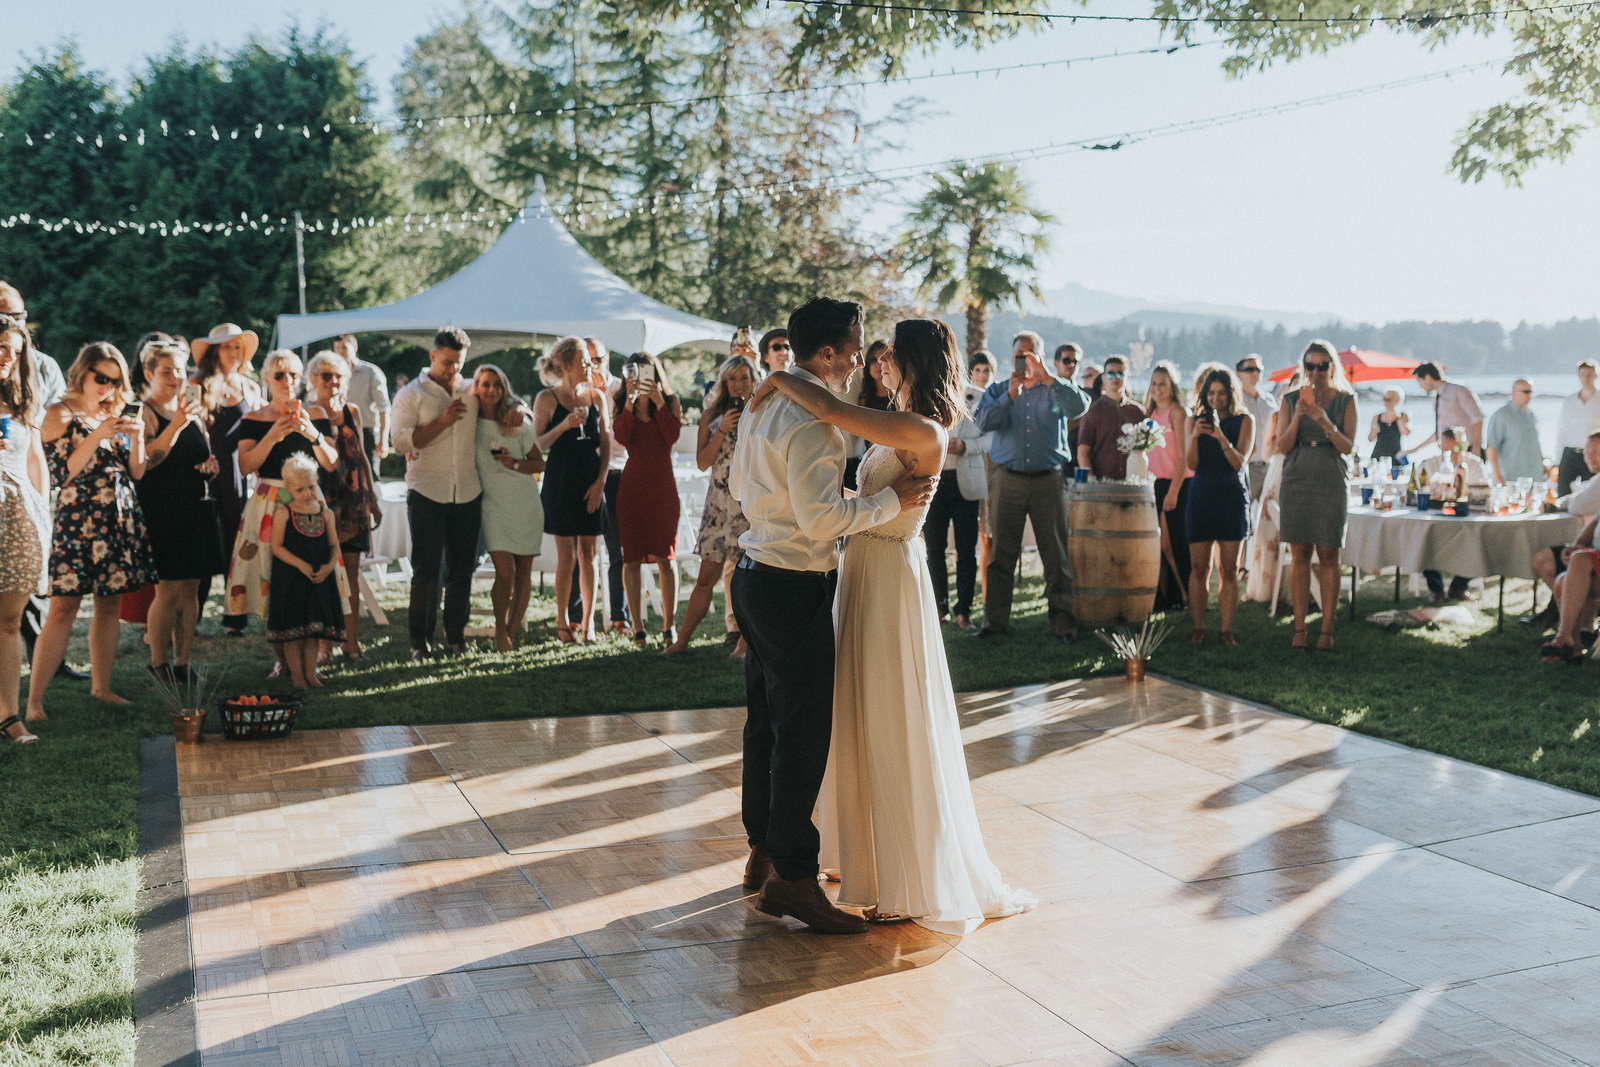 Bride and groom sharing first dance at intimate Vancouver Island wedding